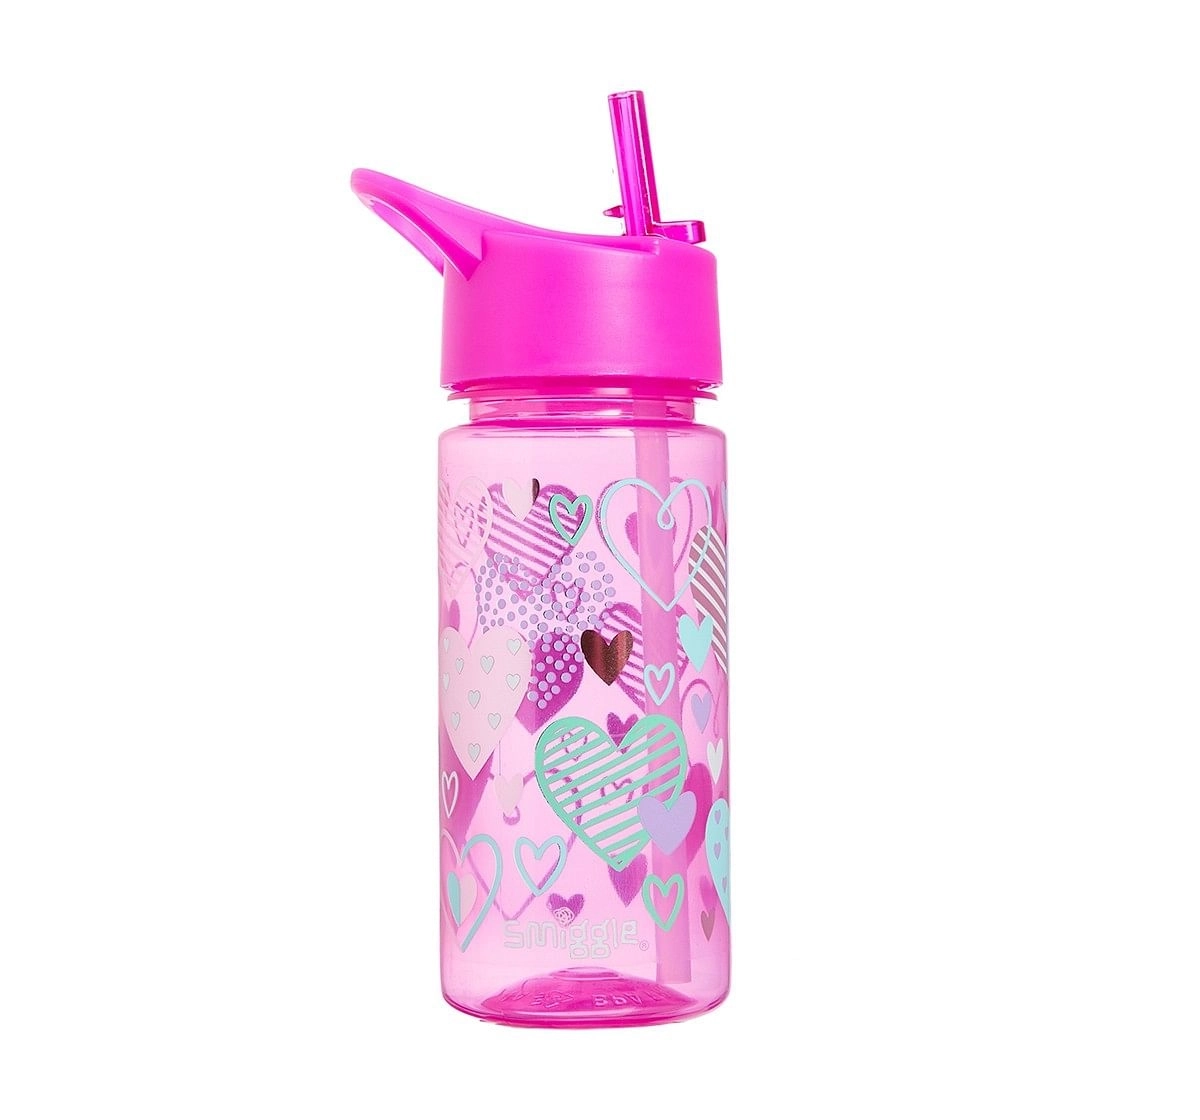 Smiggle Giggle Bottle with Flip Top Spout - Heart Print Bags for Kids age 3Y+ (Pink)